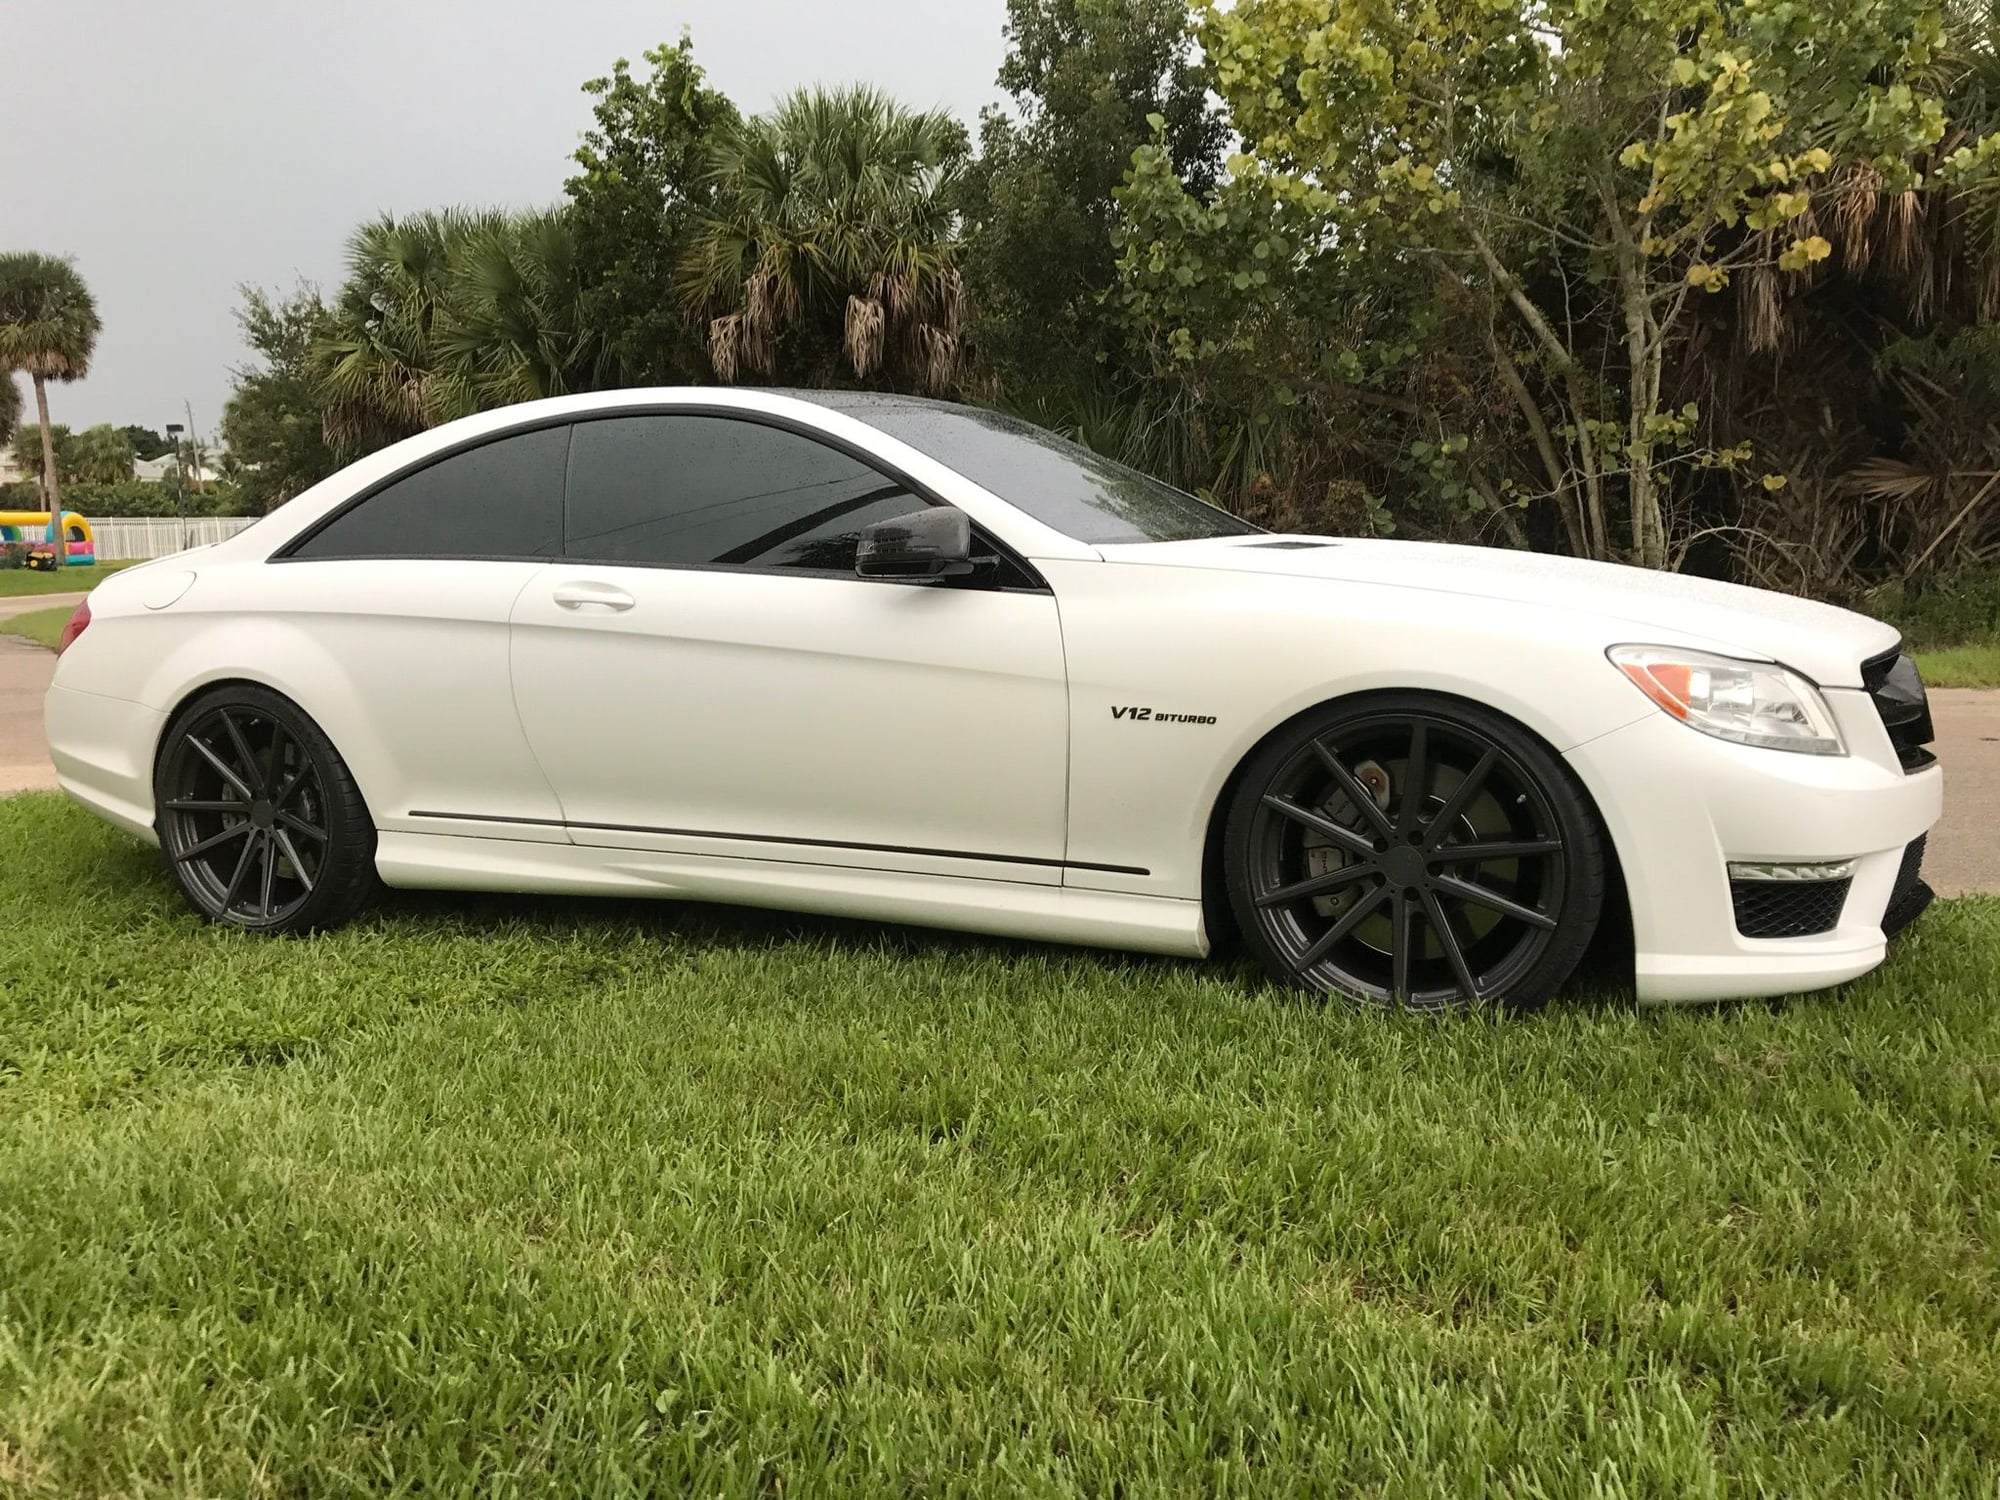 2011 Mercedes-Benz CL65 AMG - 2011 CL65 - Used - VIN Wddej7kb8ba027069 - 60,000 Miles - 12 cyl - 2WD - Automatic - Coupe - Black - Palm Beach, FL 33480, United States